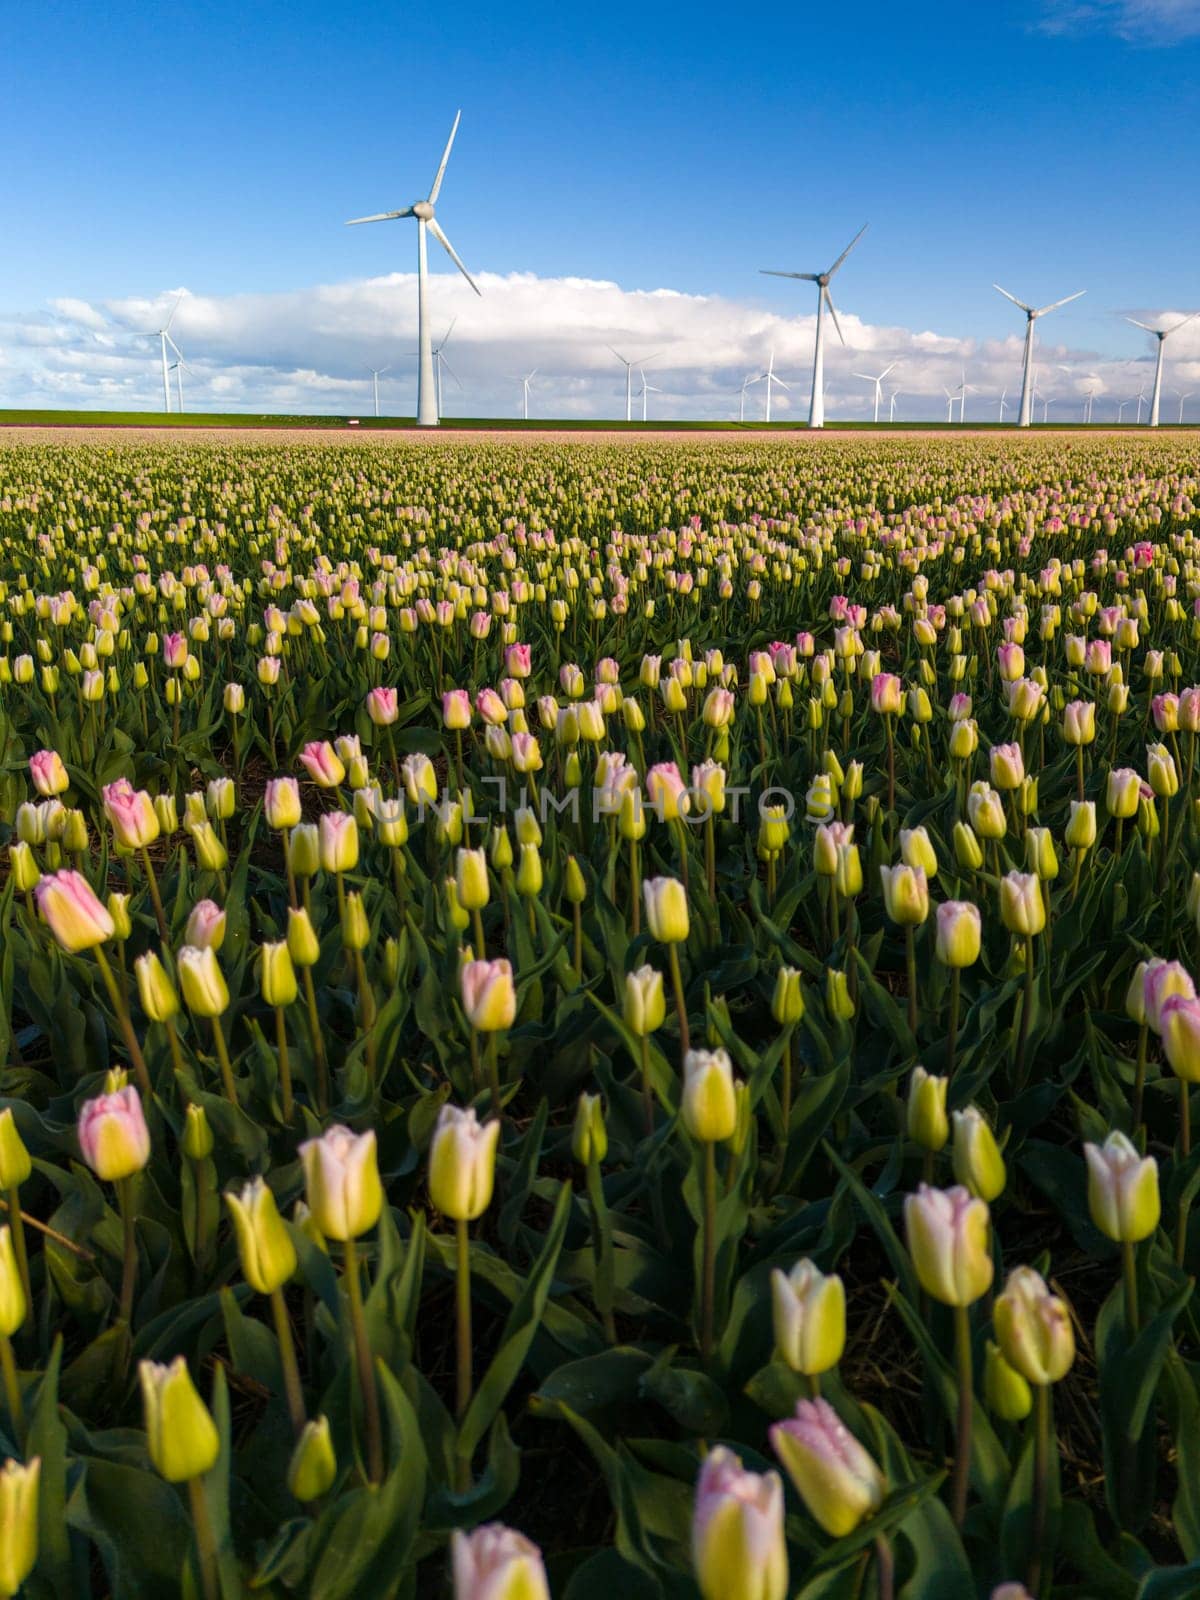 A vibrant field of tulips stretches out beneath the towering windmills of the Netherlands in Spring, creating a colorful and picturesque scene by fokkebok